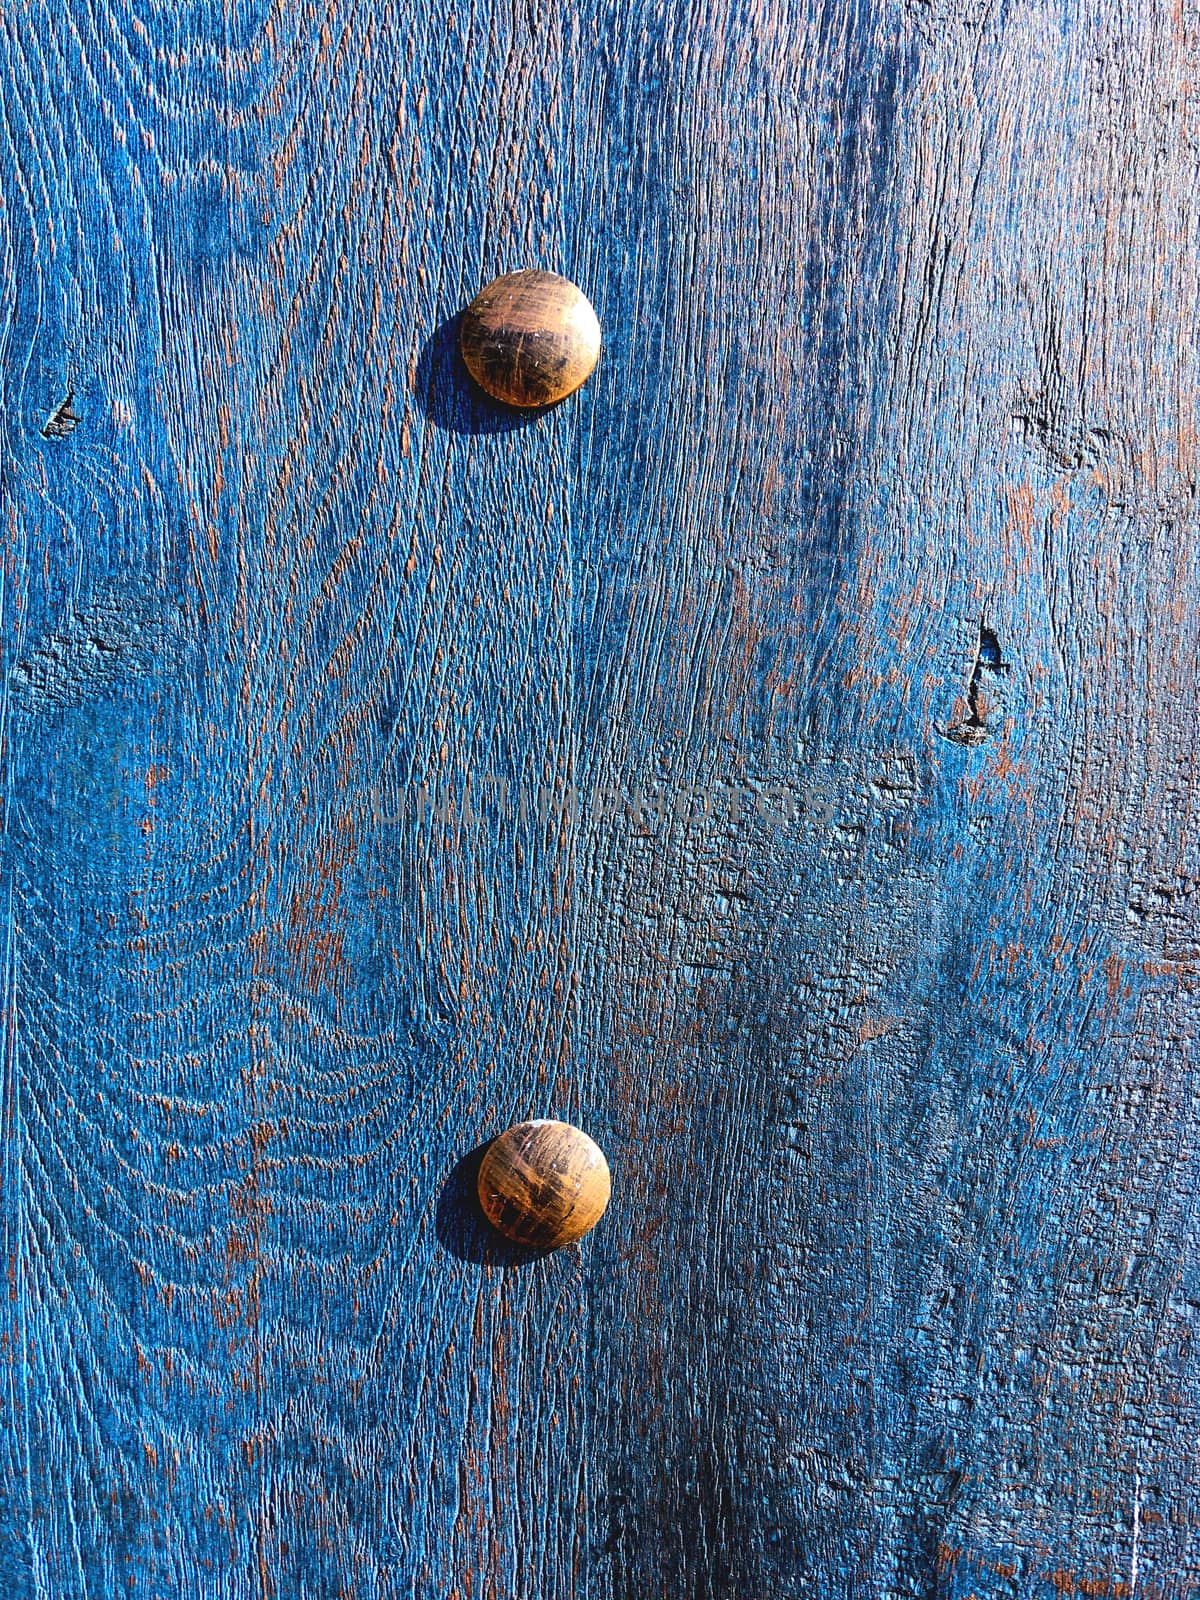 Classic blue wooden background of old door with metal details.